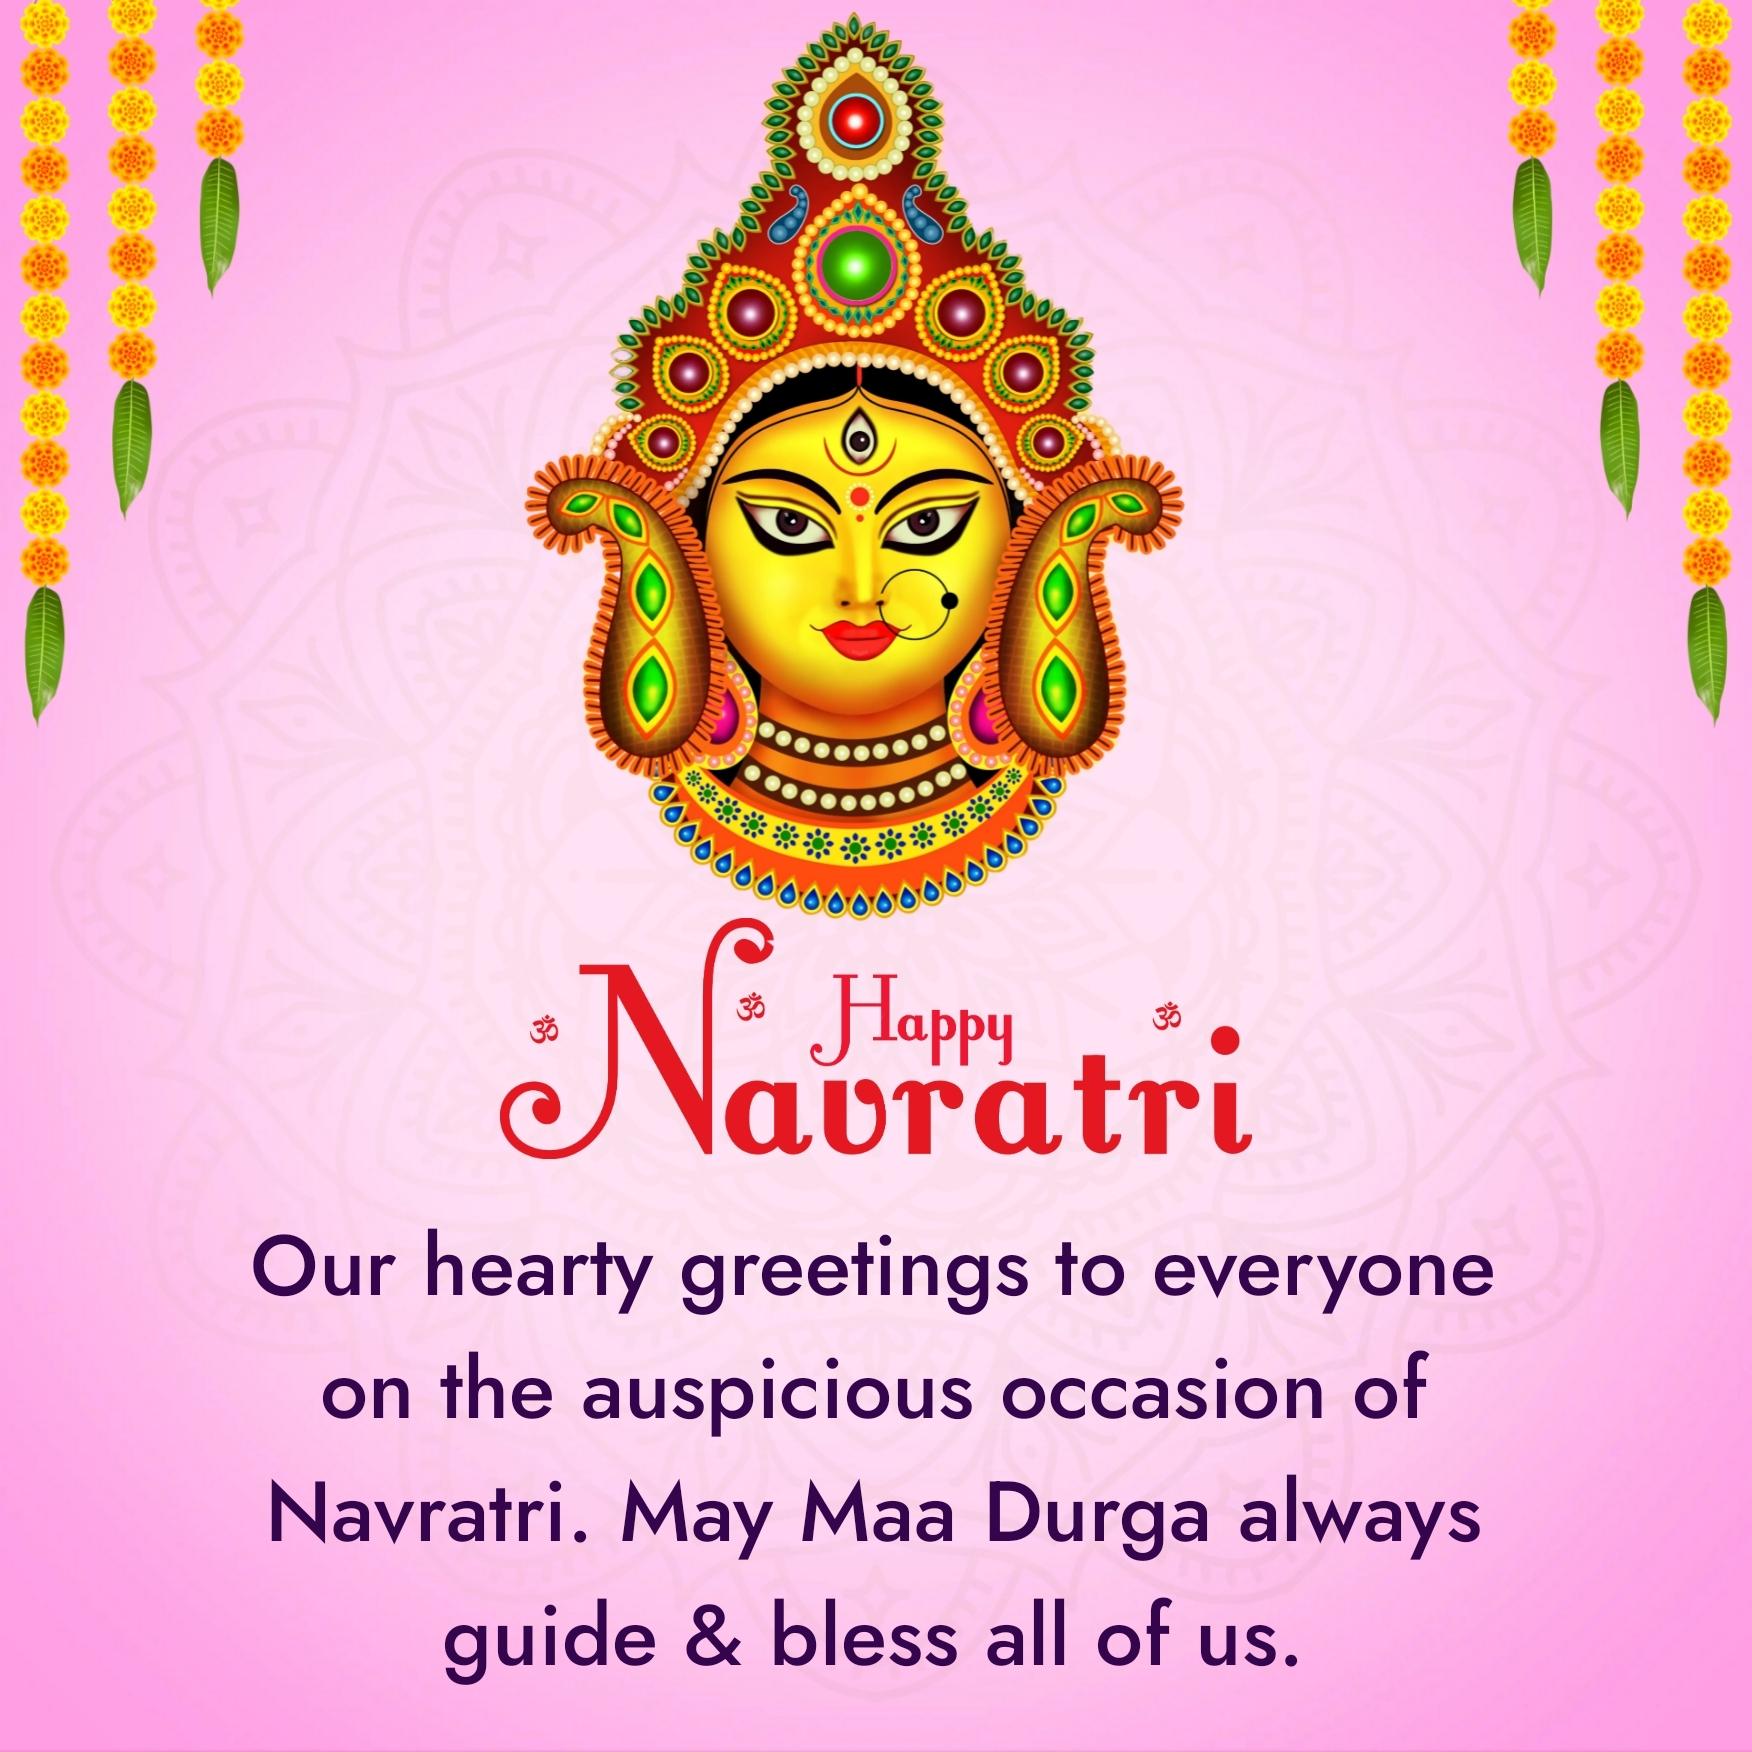 Our hearty greetings to everyone on the auspicious occasion